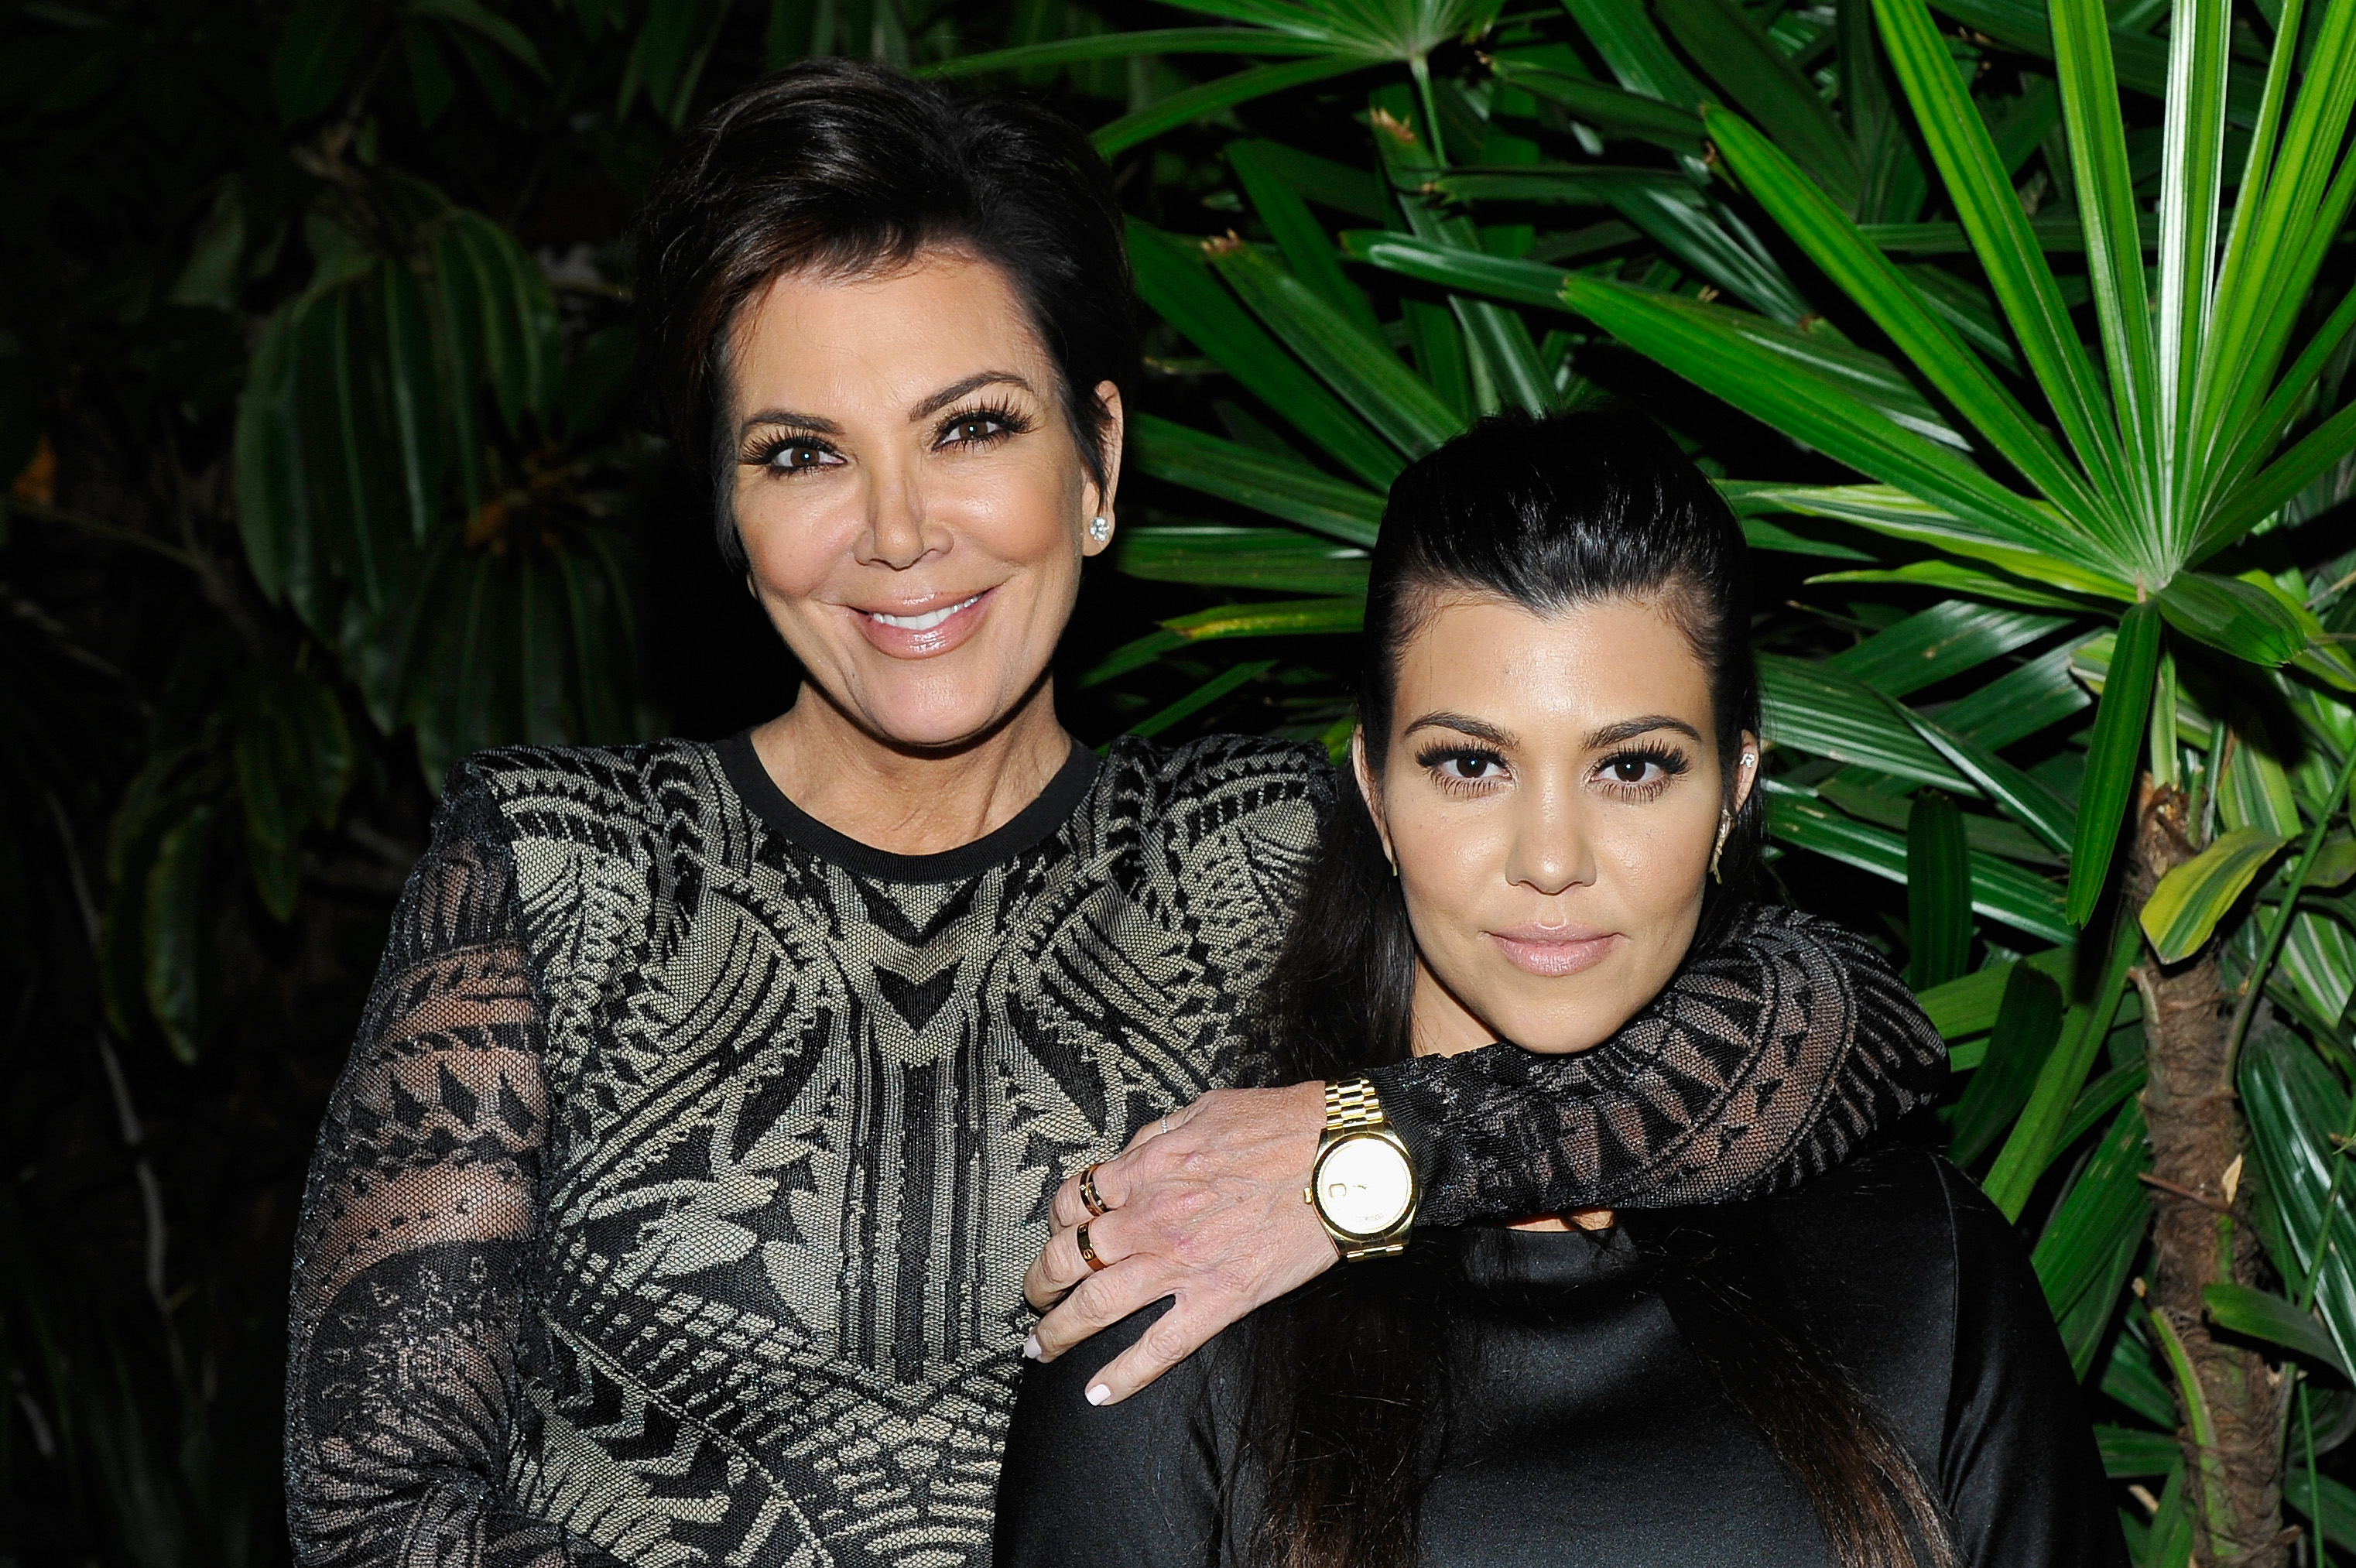 Kourtney Kardashian Can't Escape Her Family's Fame Obsession